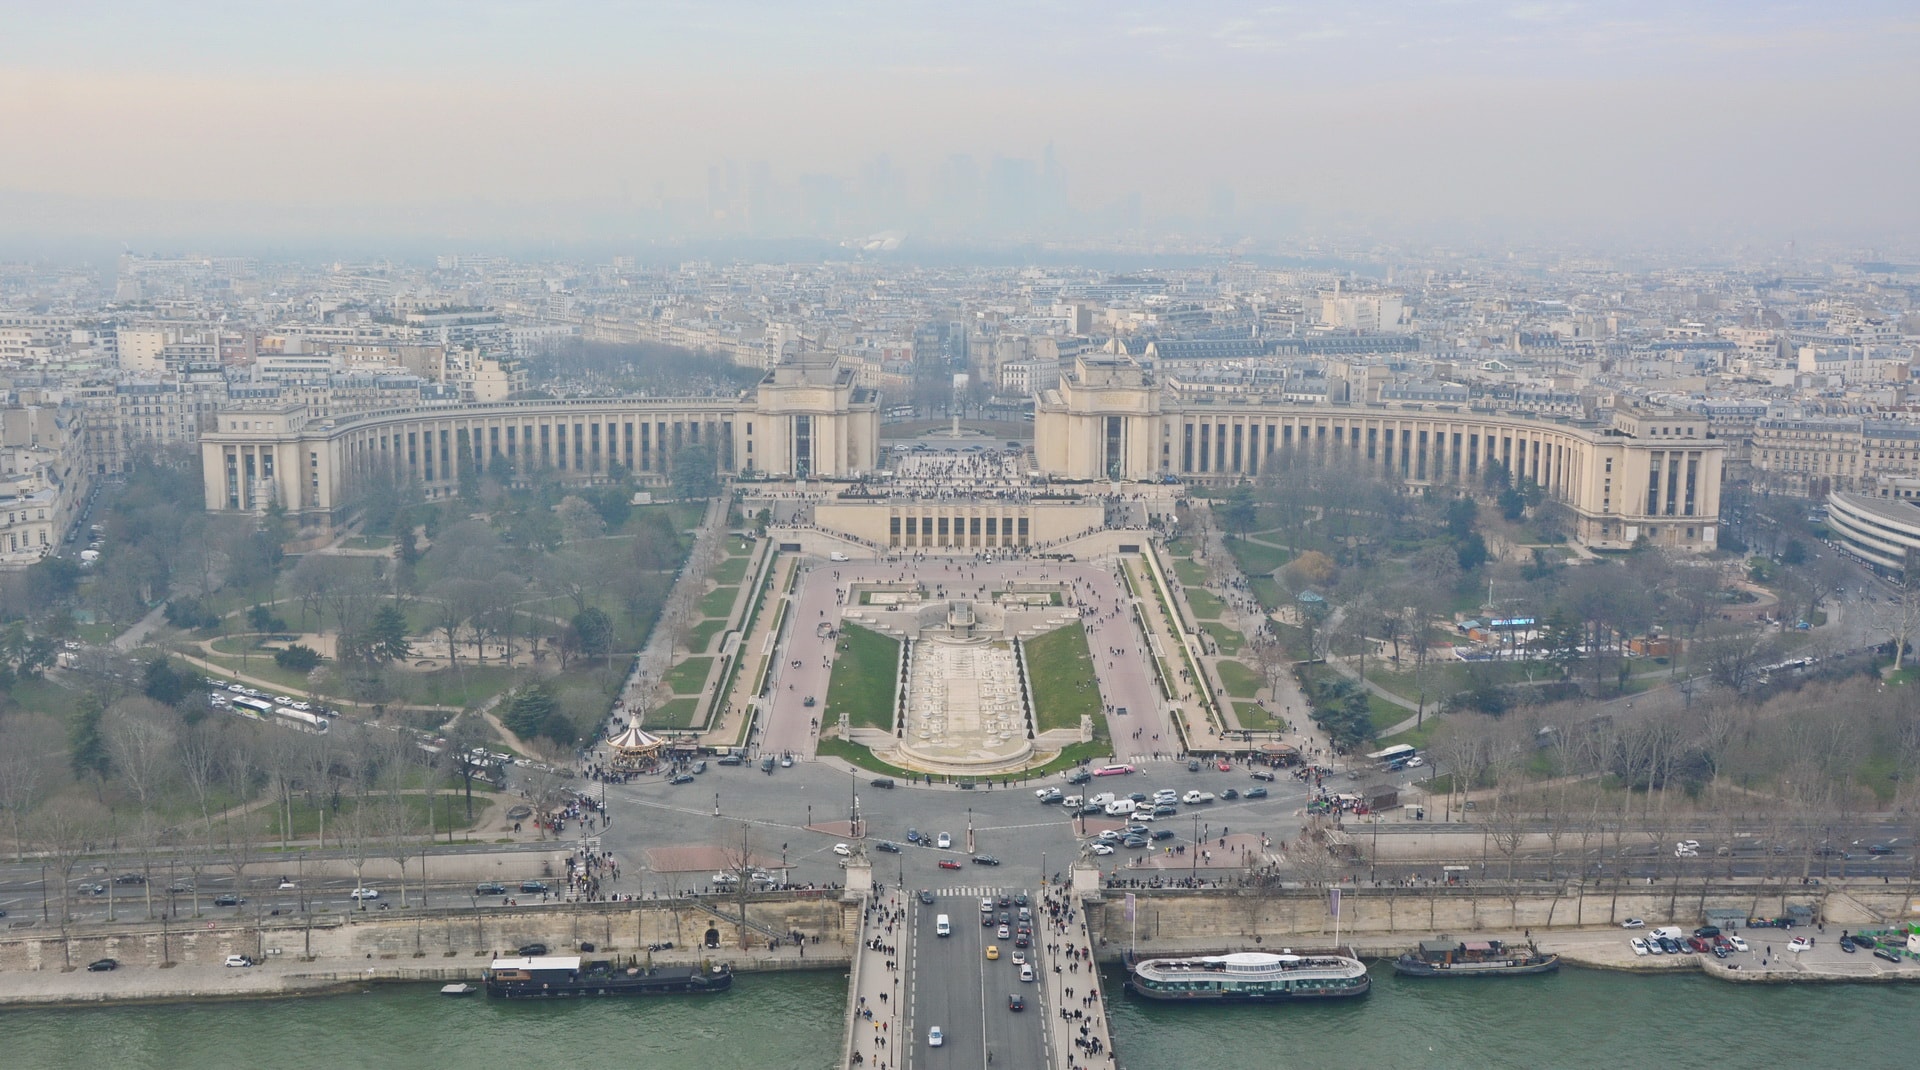 Chaillot Palace and Jardins du Trocadéro garden, looking from the 2nd level of the Eiffel Tower